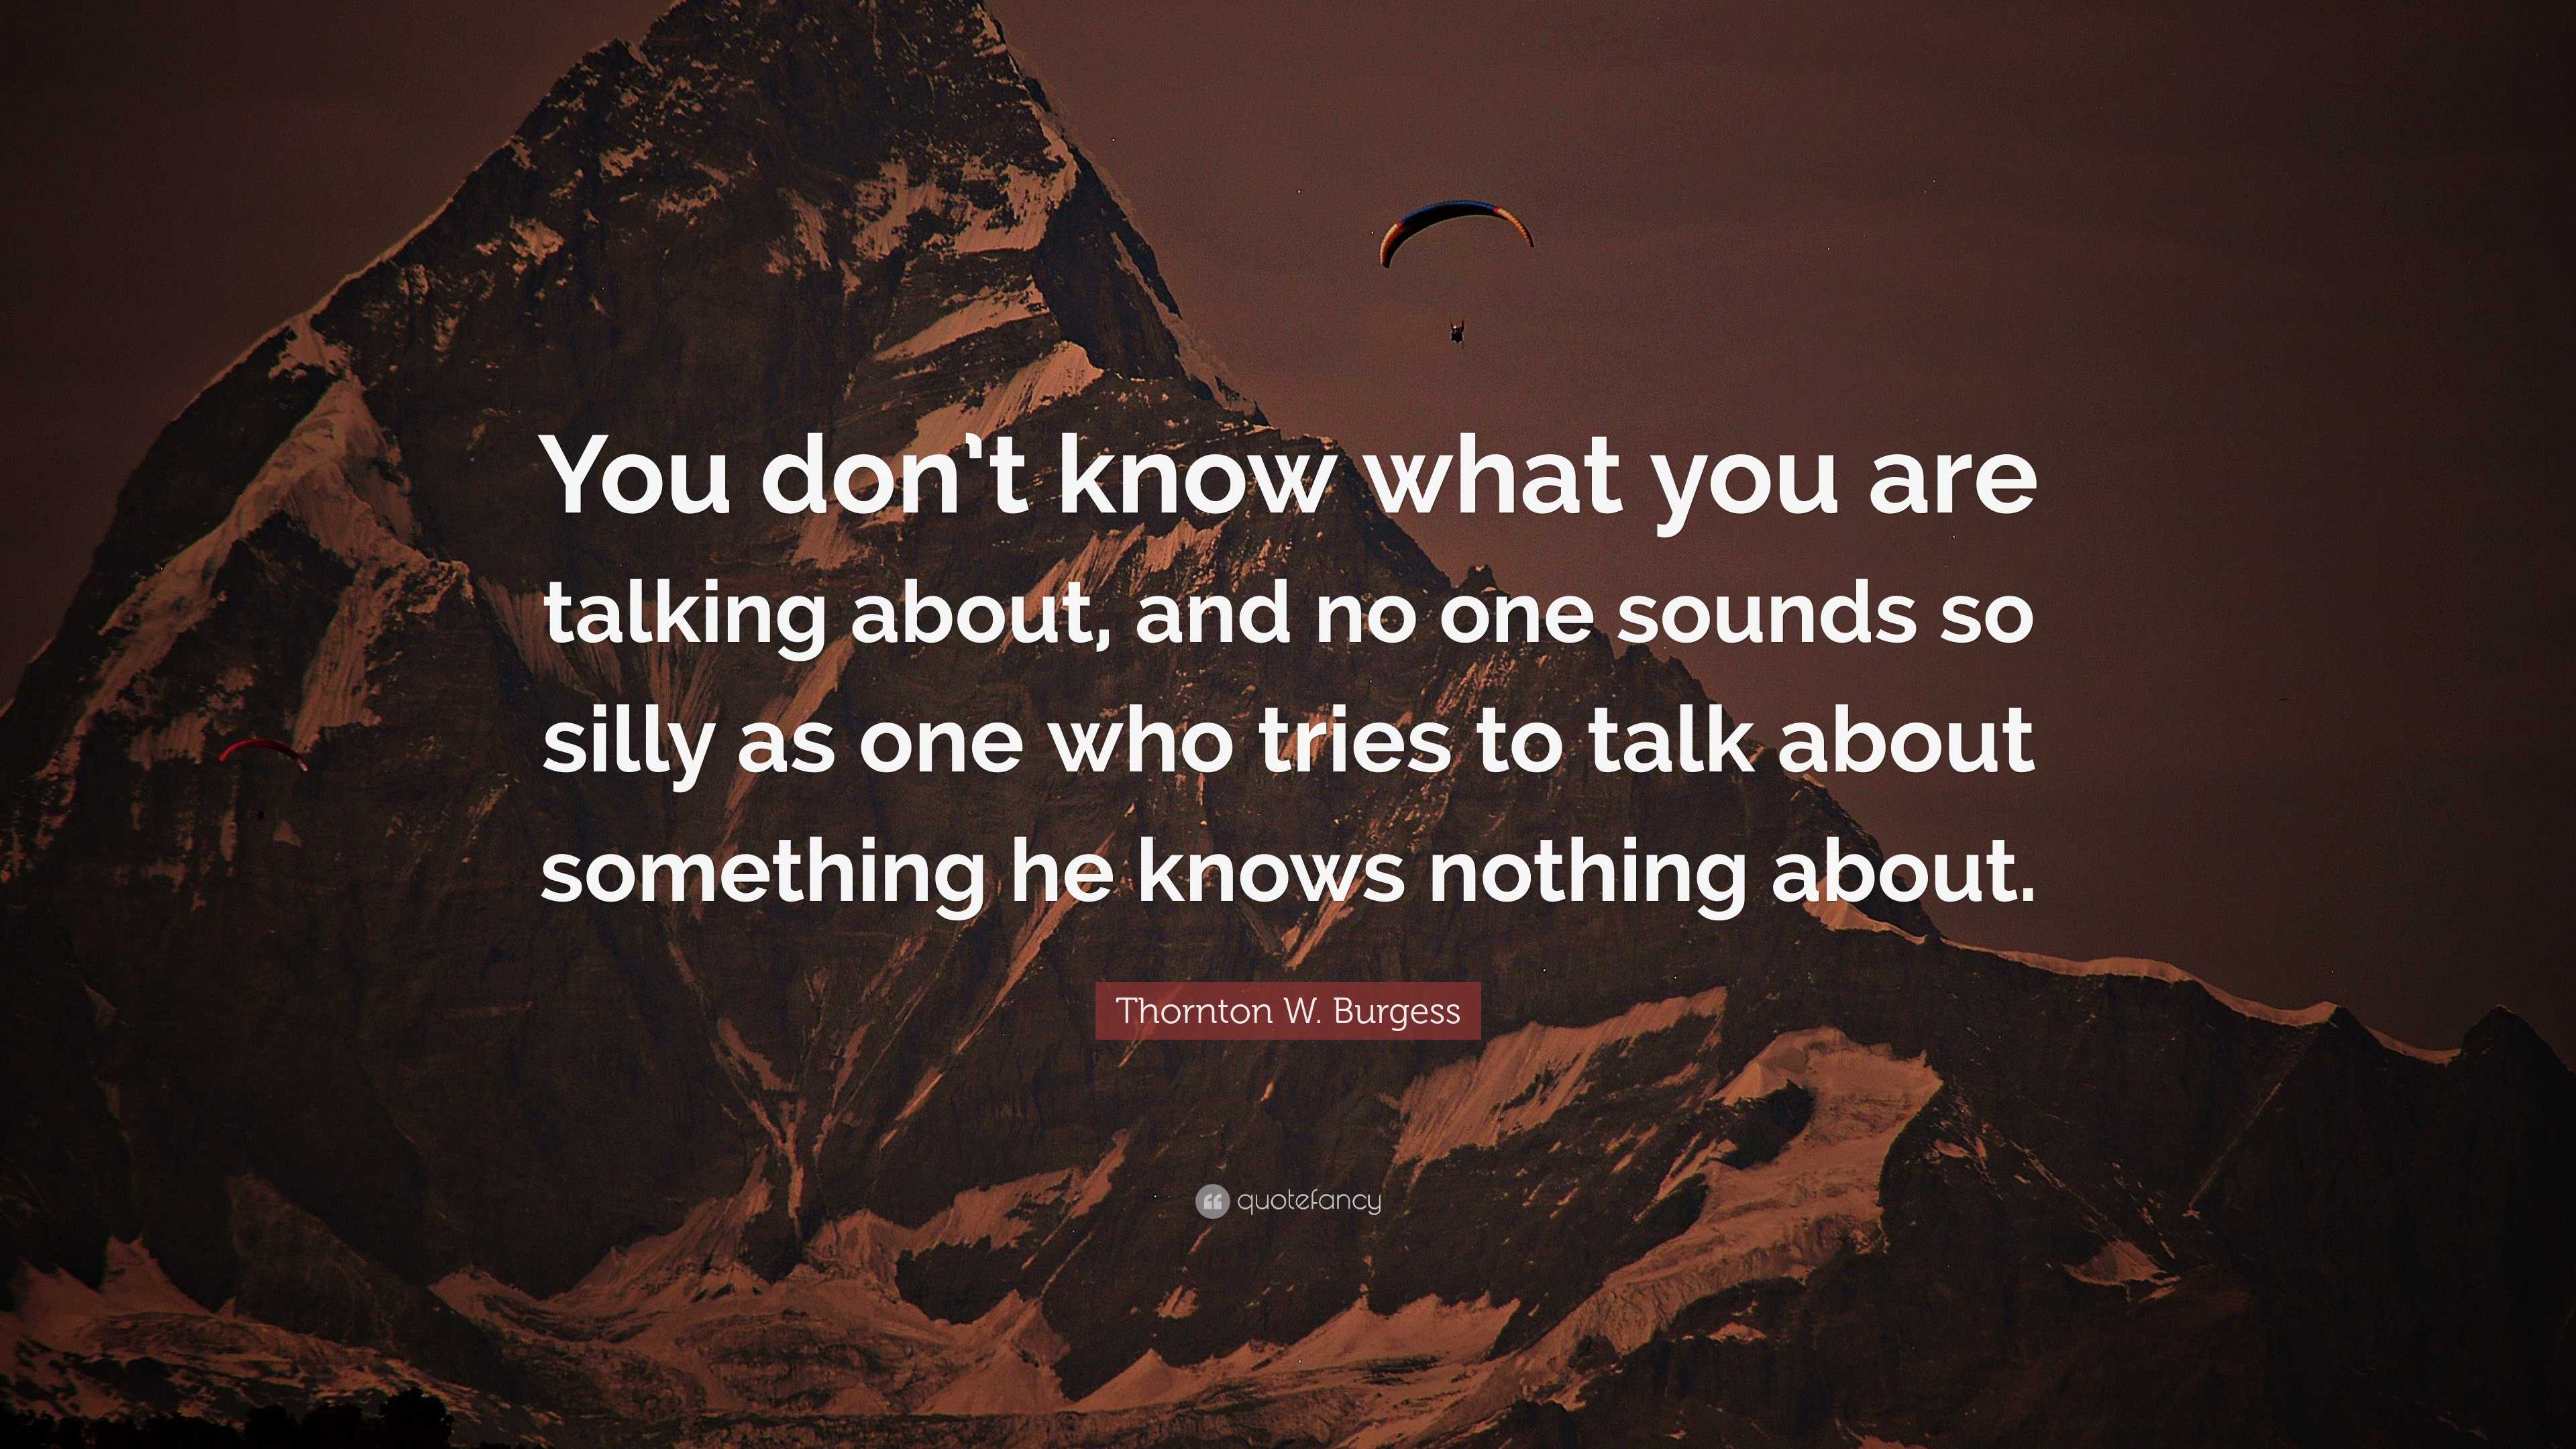 https://quotefancy.com/media/wallpaper/3840x2160/7832758-Thornton-W-Burgess-Quote-You-don-t-know-what-you-are-talking-about.jpg